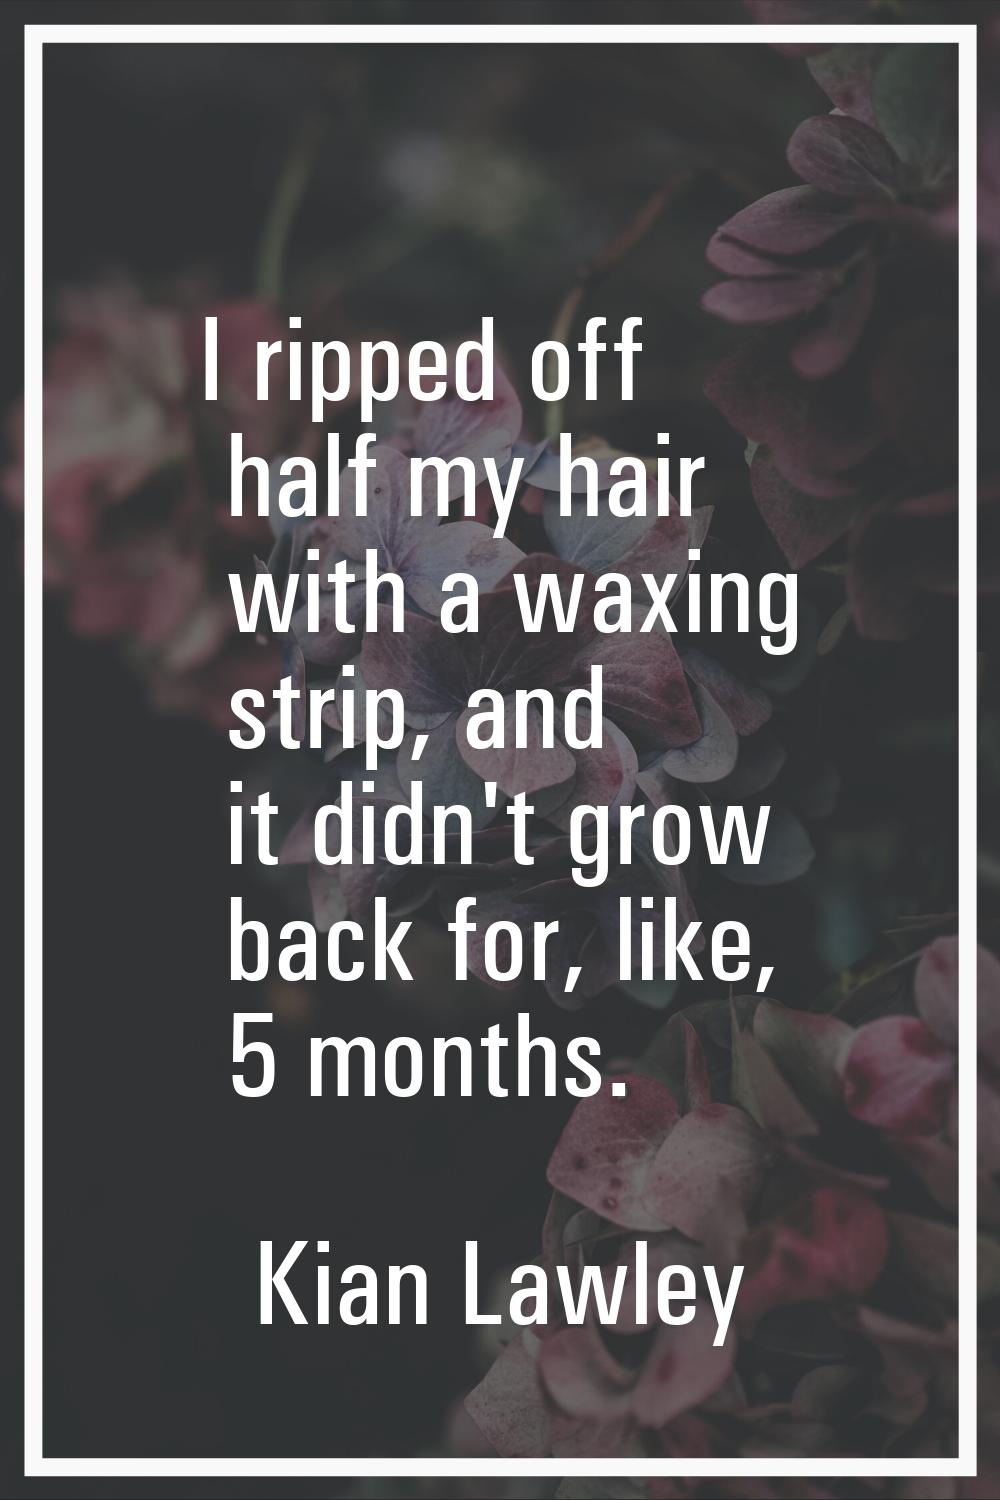 I ripped off half my hair with a waxing strip, and it didn't grow back for, like, 5 months.